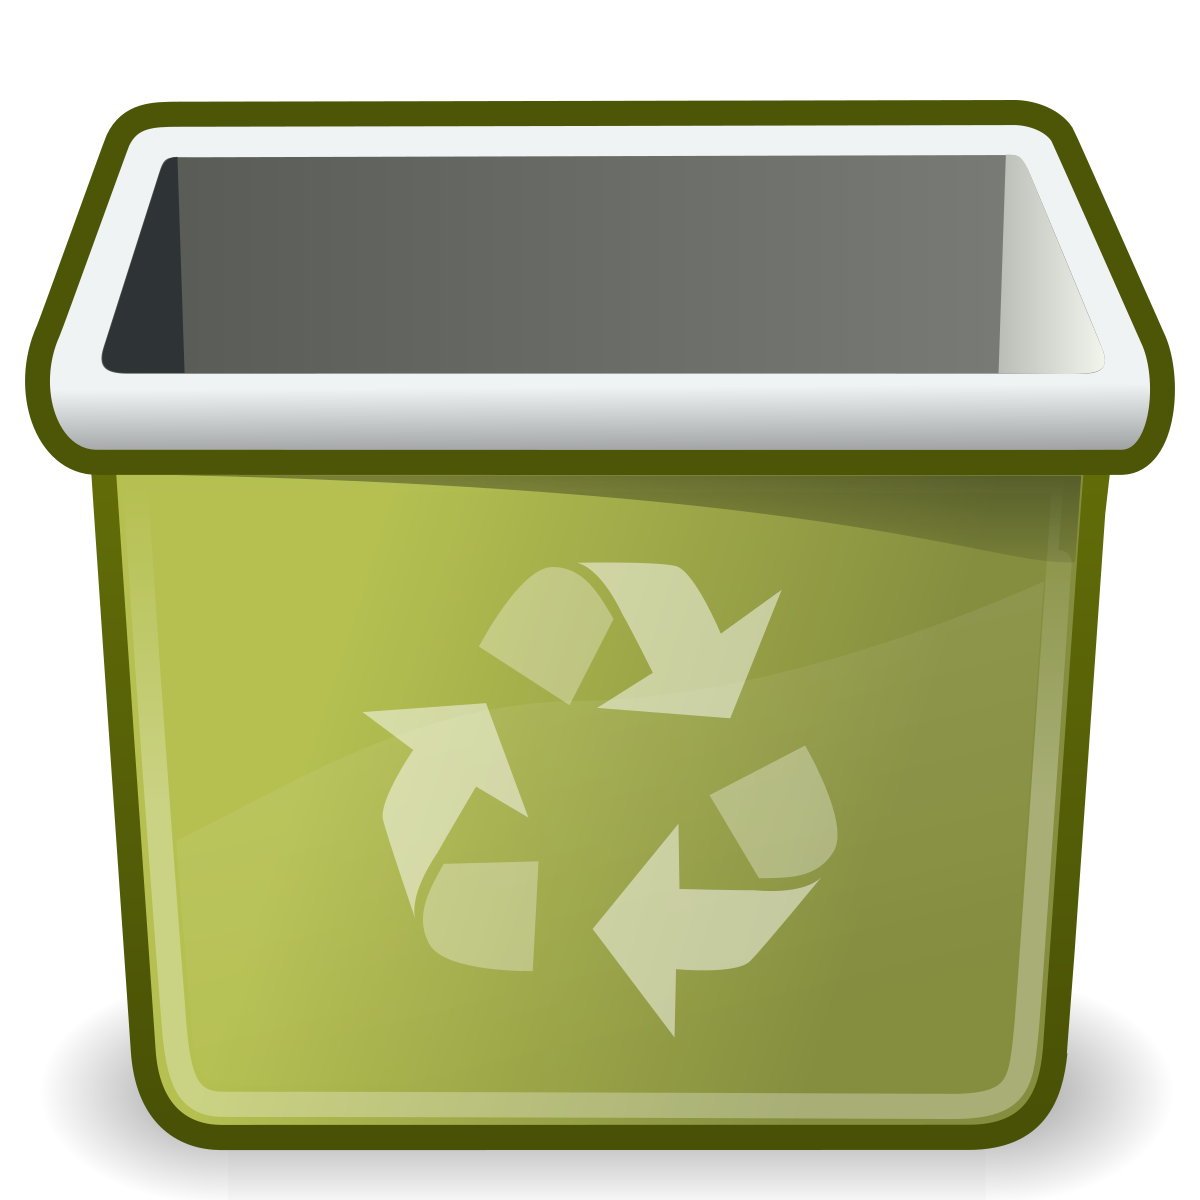 USB stick with a recycle bin icon